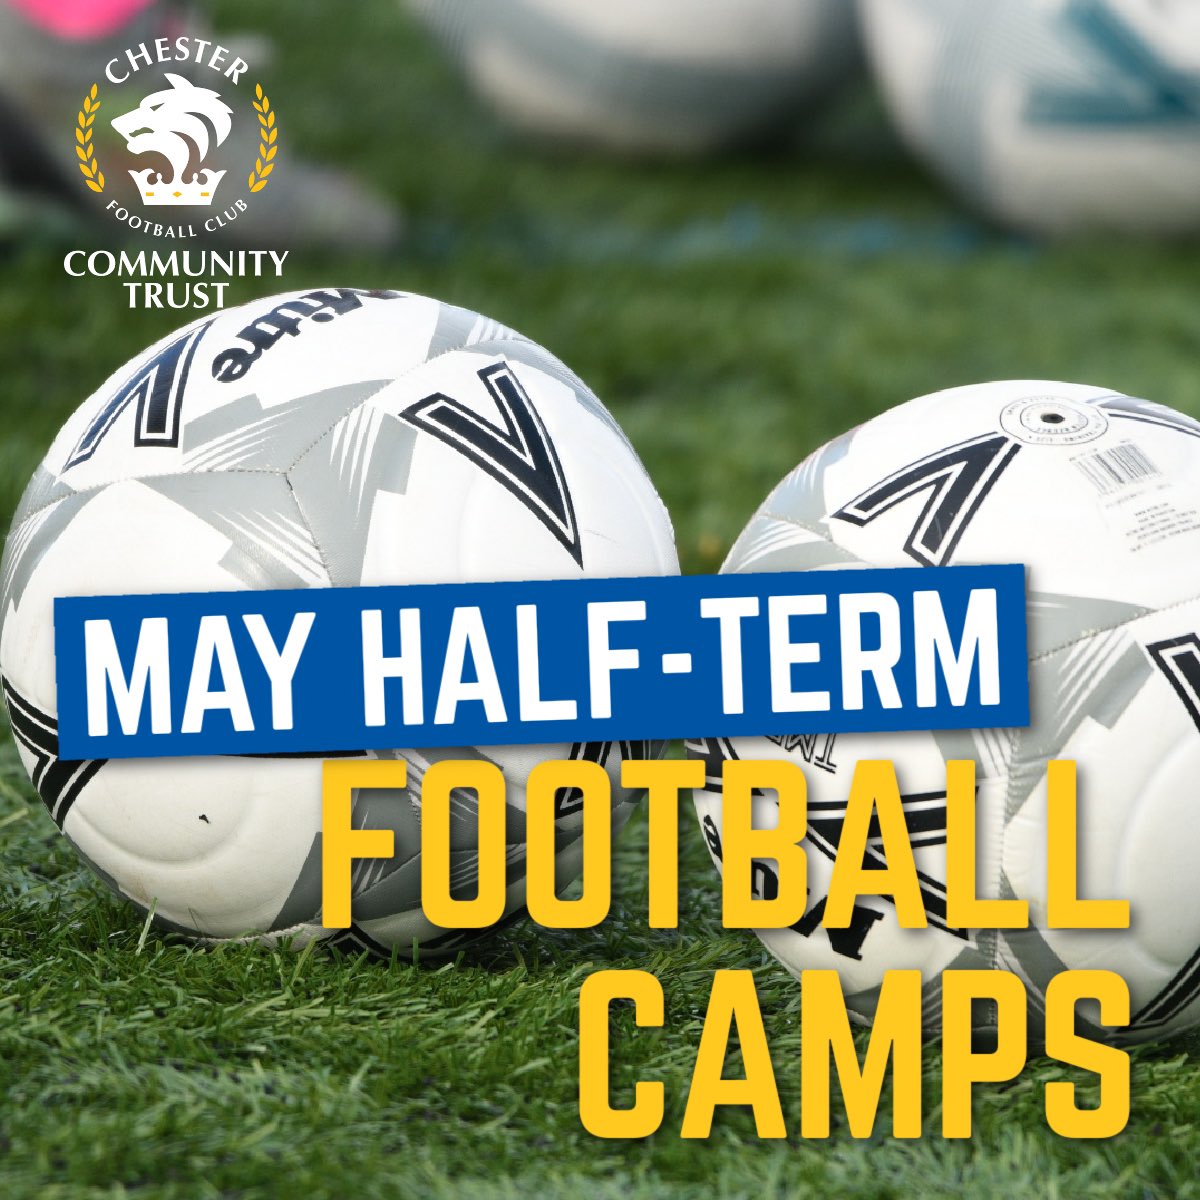 Plan ahead for May half-term and secure your place for our @ChesterFC football camps! ⚽️ We have 3️⃣ courses to choose from and our Early Bird prices mean you can book for just £12 per day! More details ➡️ bit.ly/3xVD12D